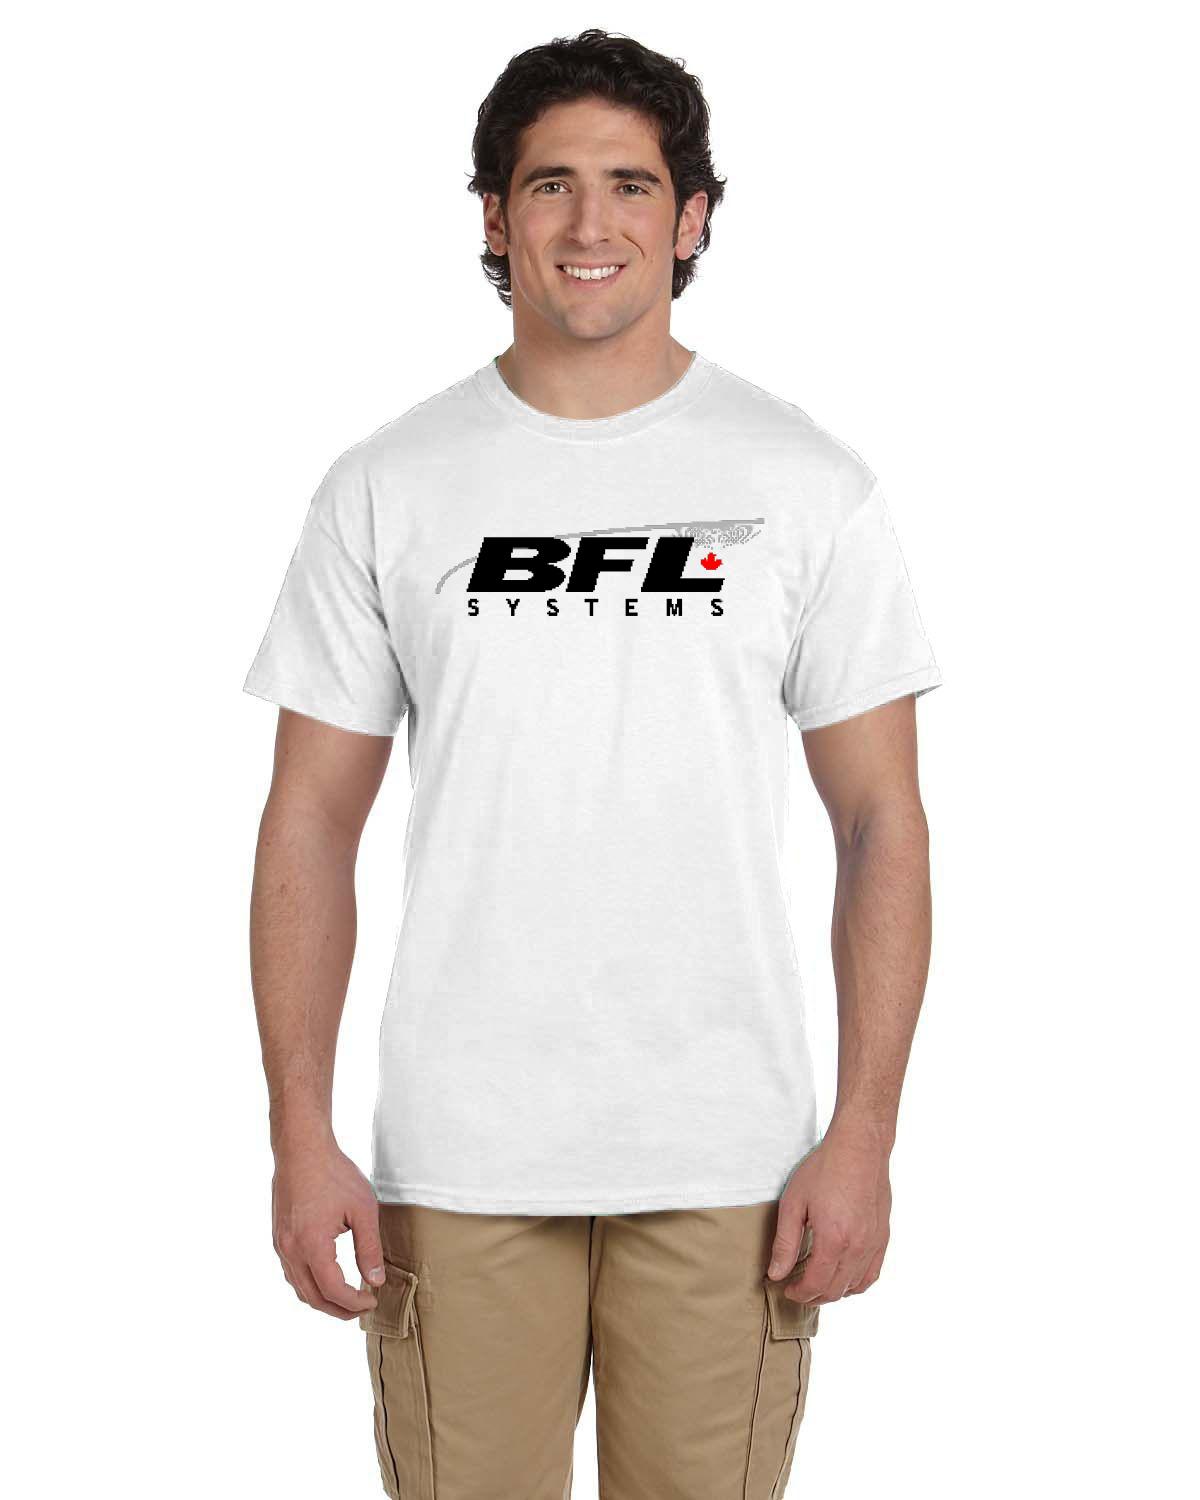 BFL Systems Men's T-Shirt